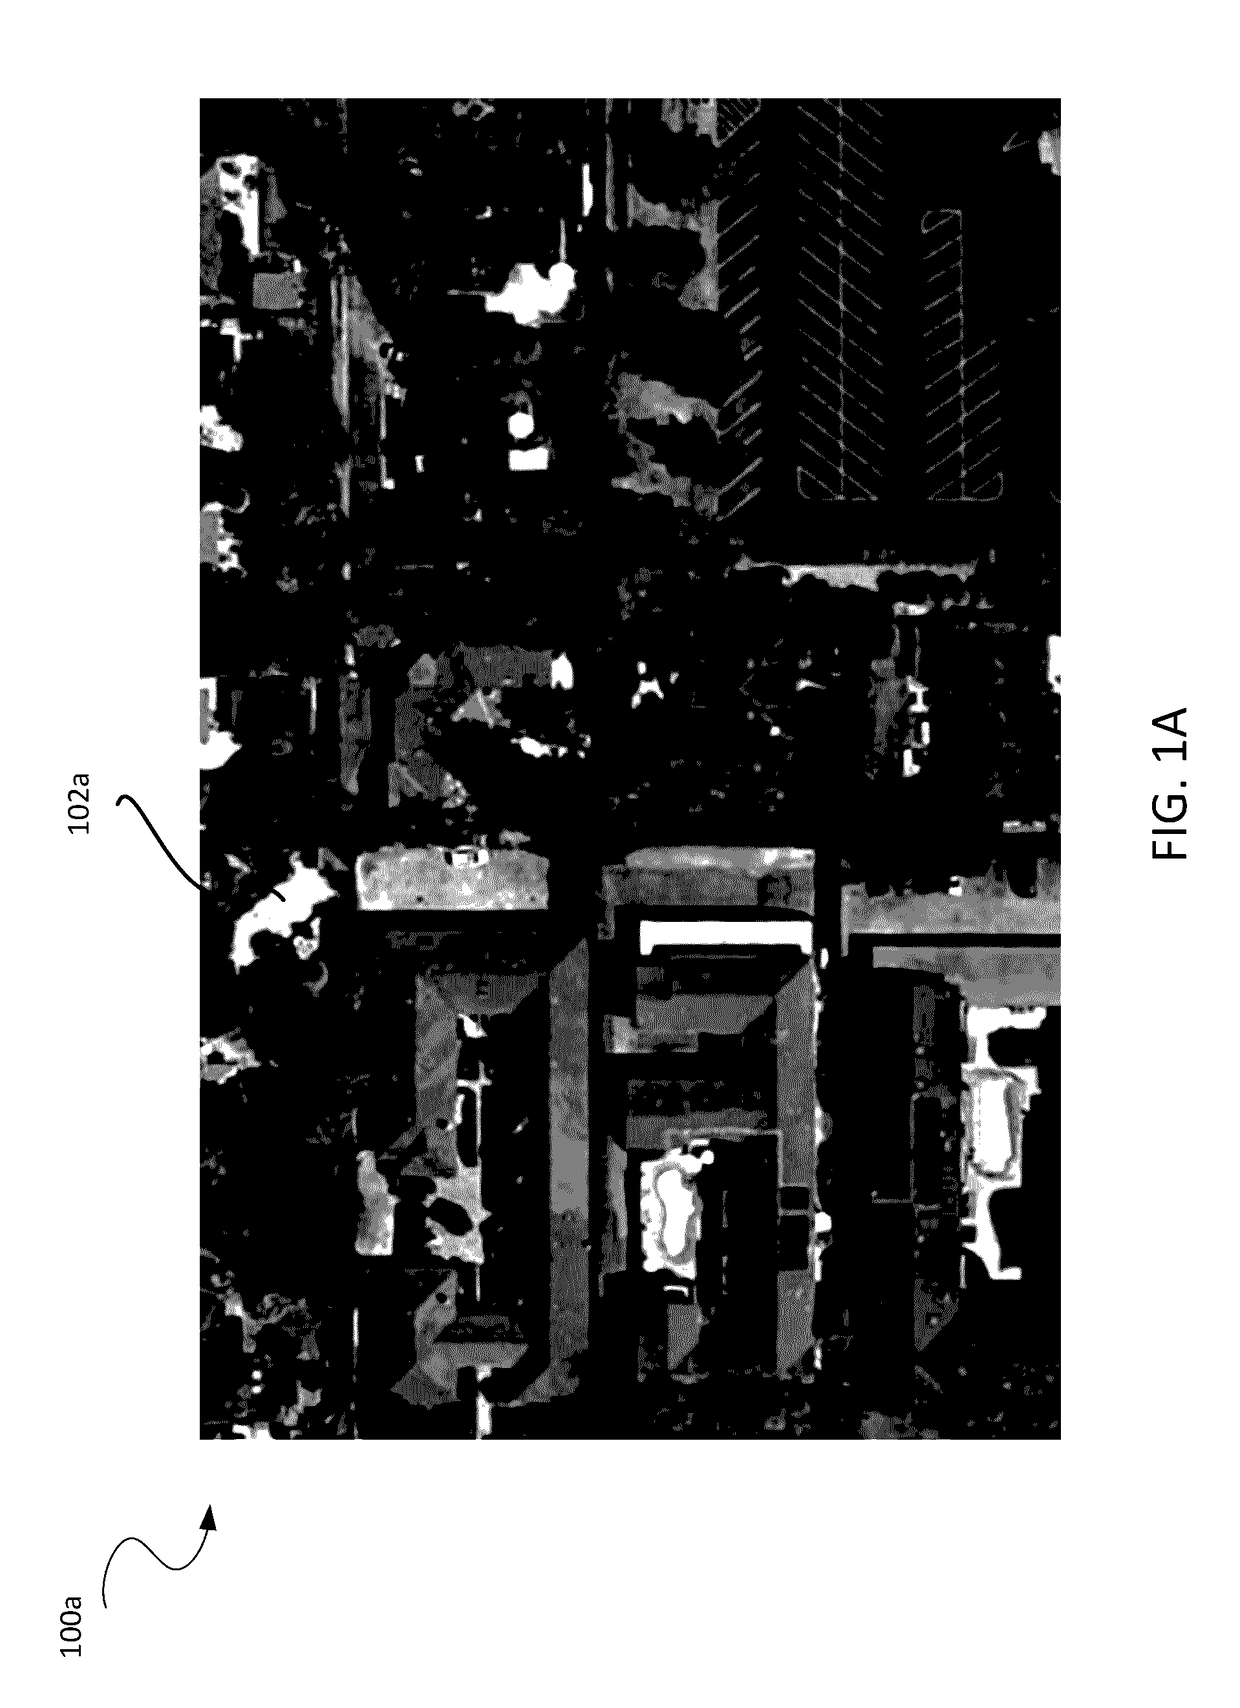 Systems and methods for analyzing remote sensing imagery